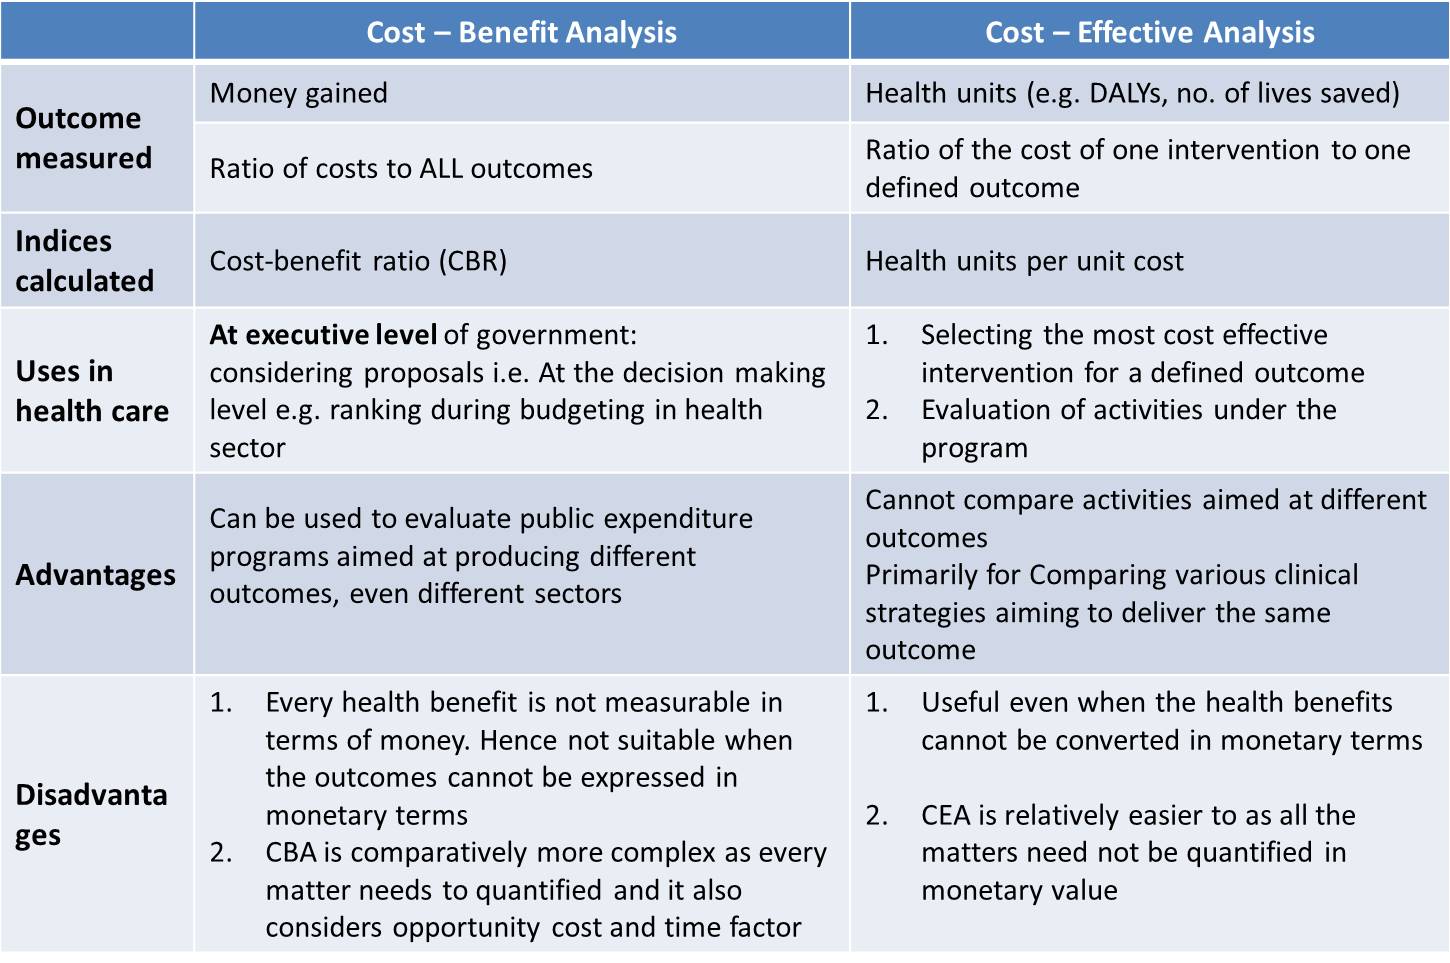 what is cost analysis in education